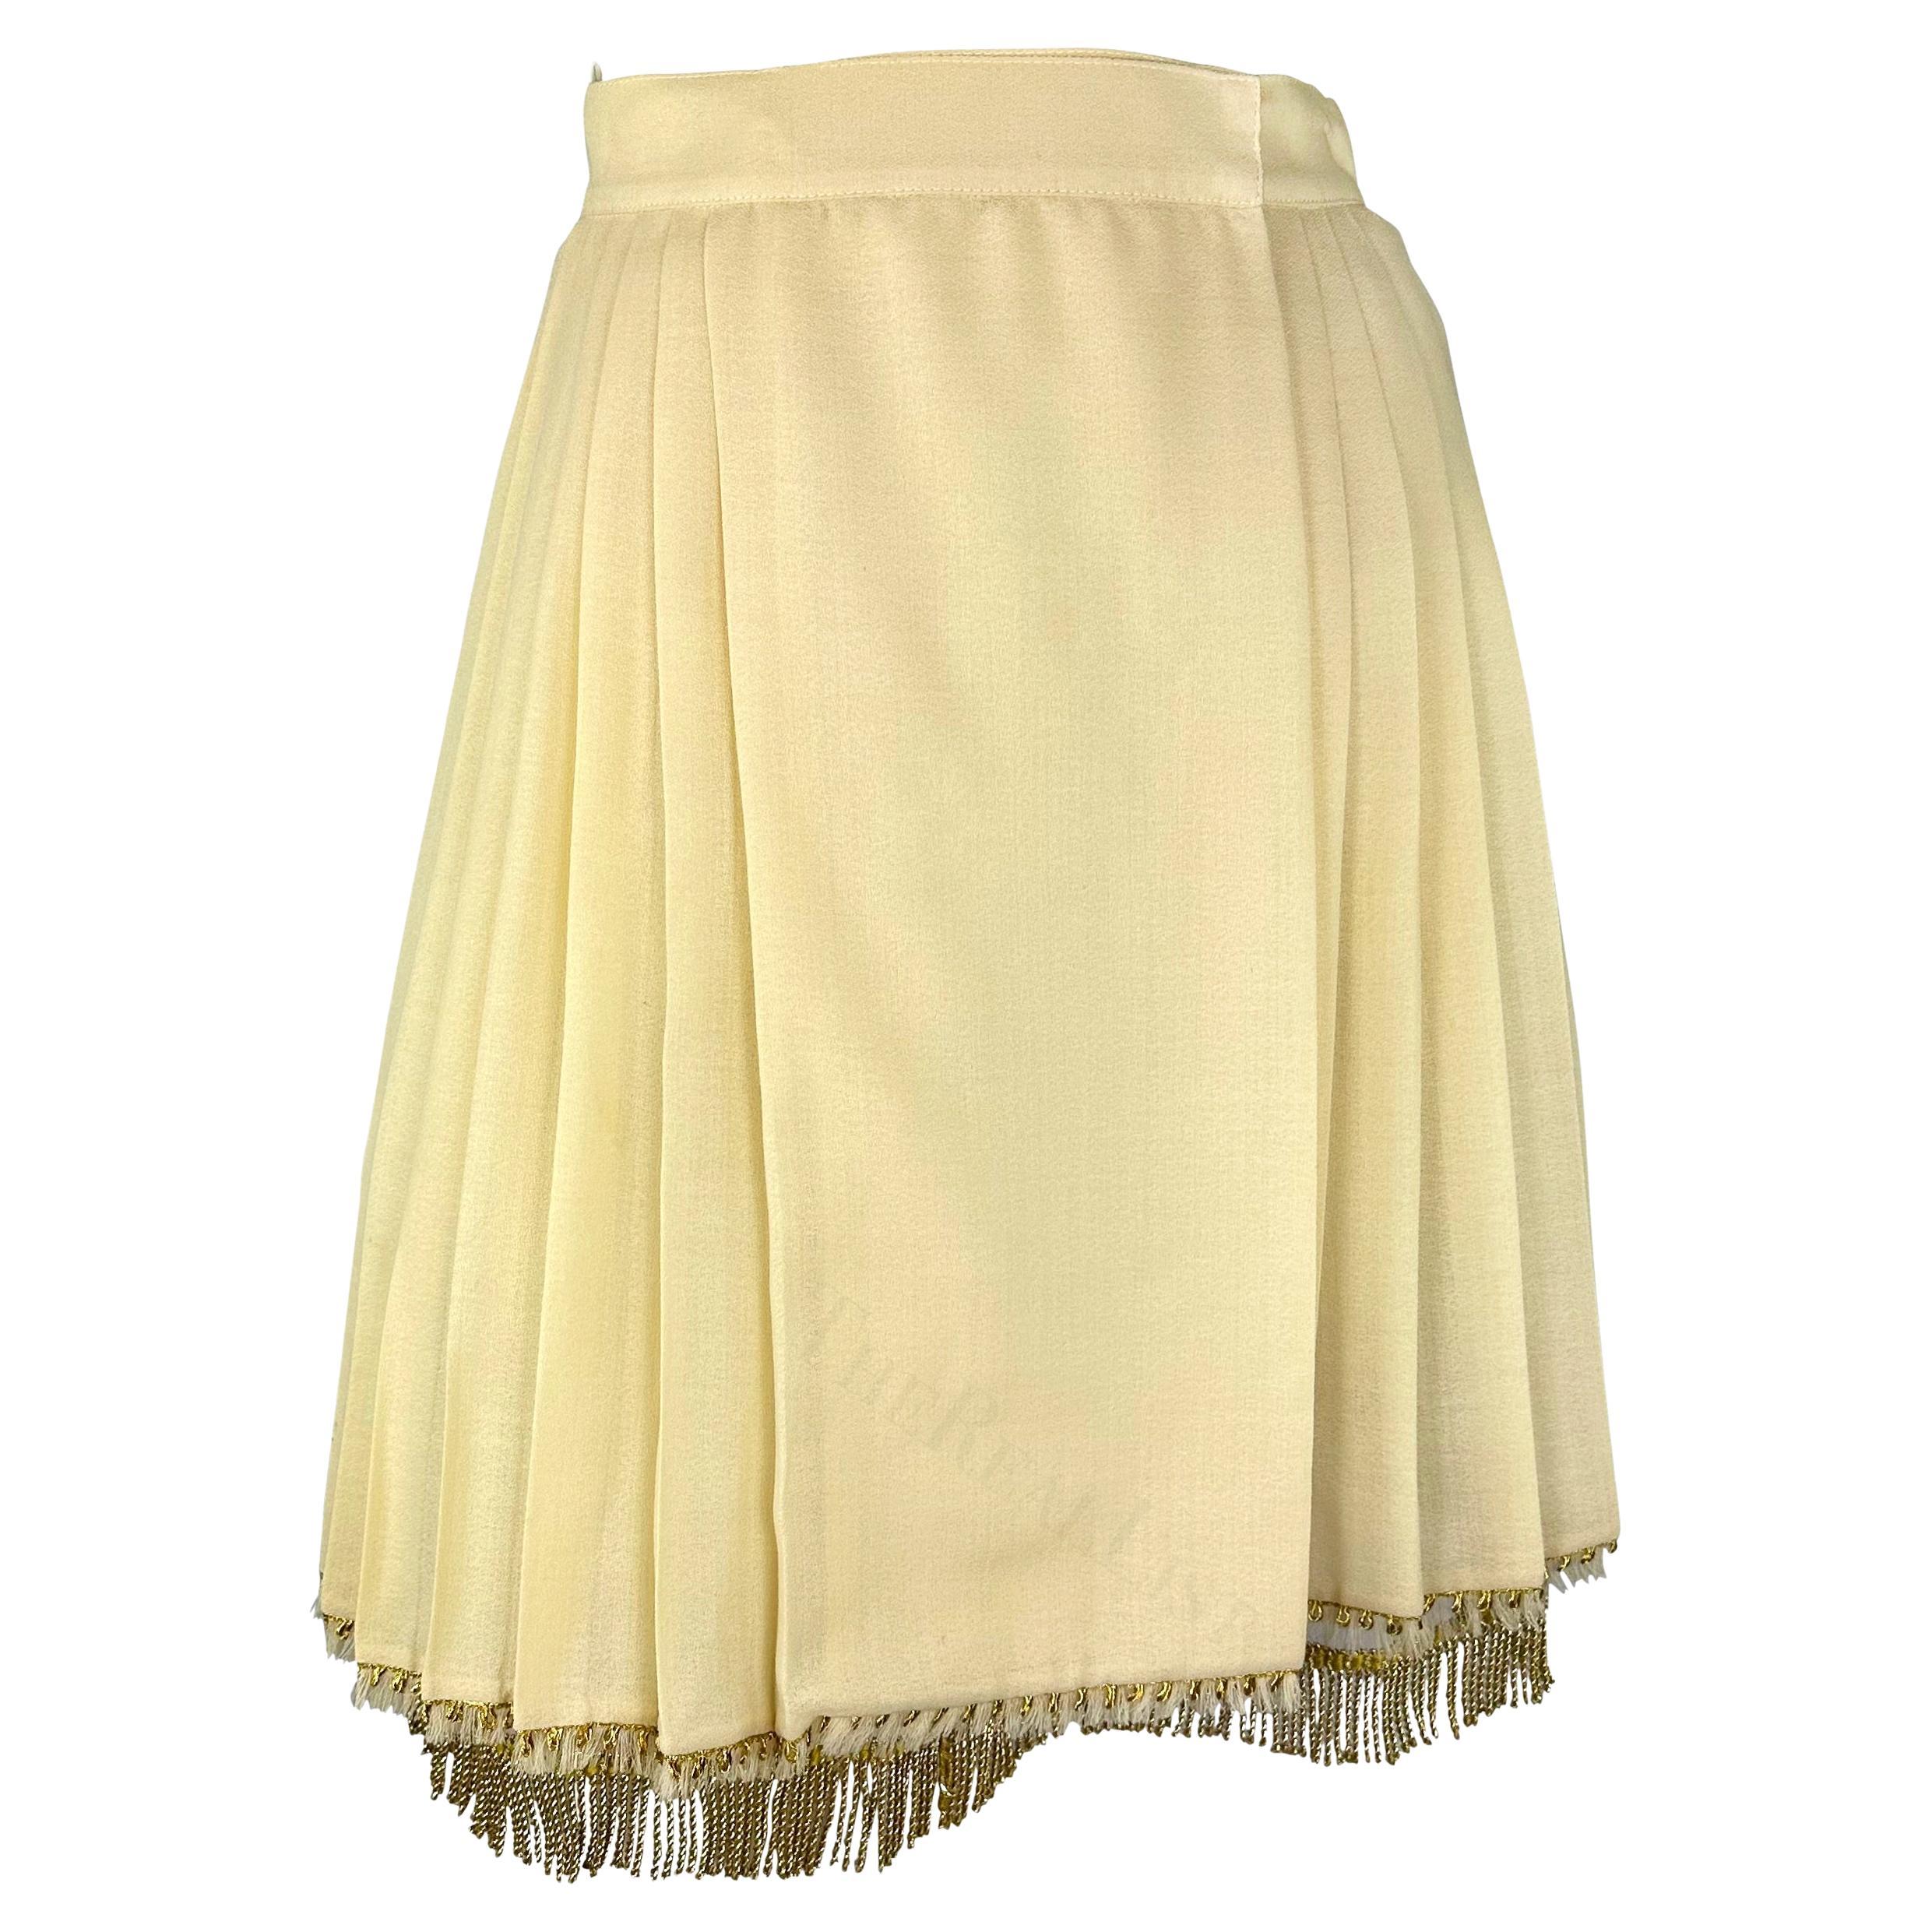 S/S 1992 Gianni Versace Couture Off-White Pleat Wrap Fringe Skirt Crinoline Set For Sale